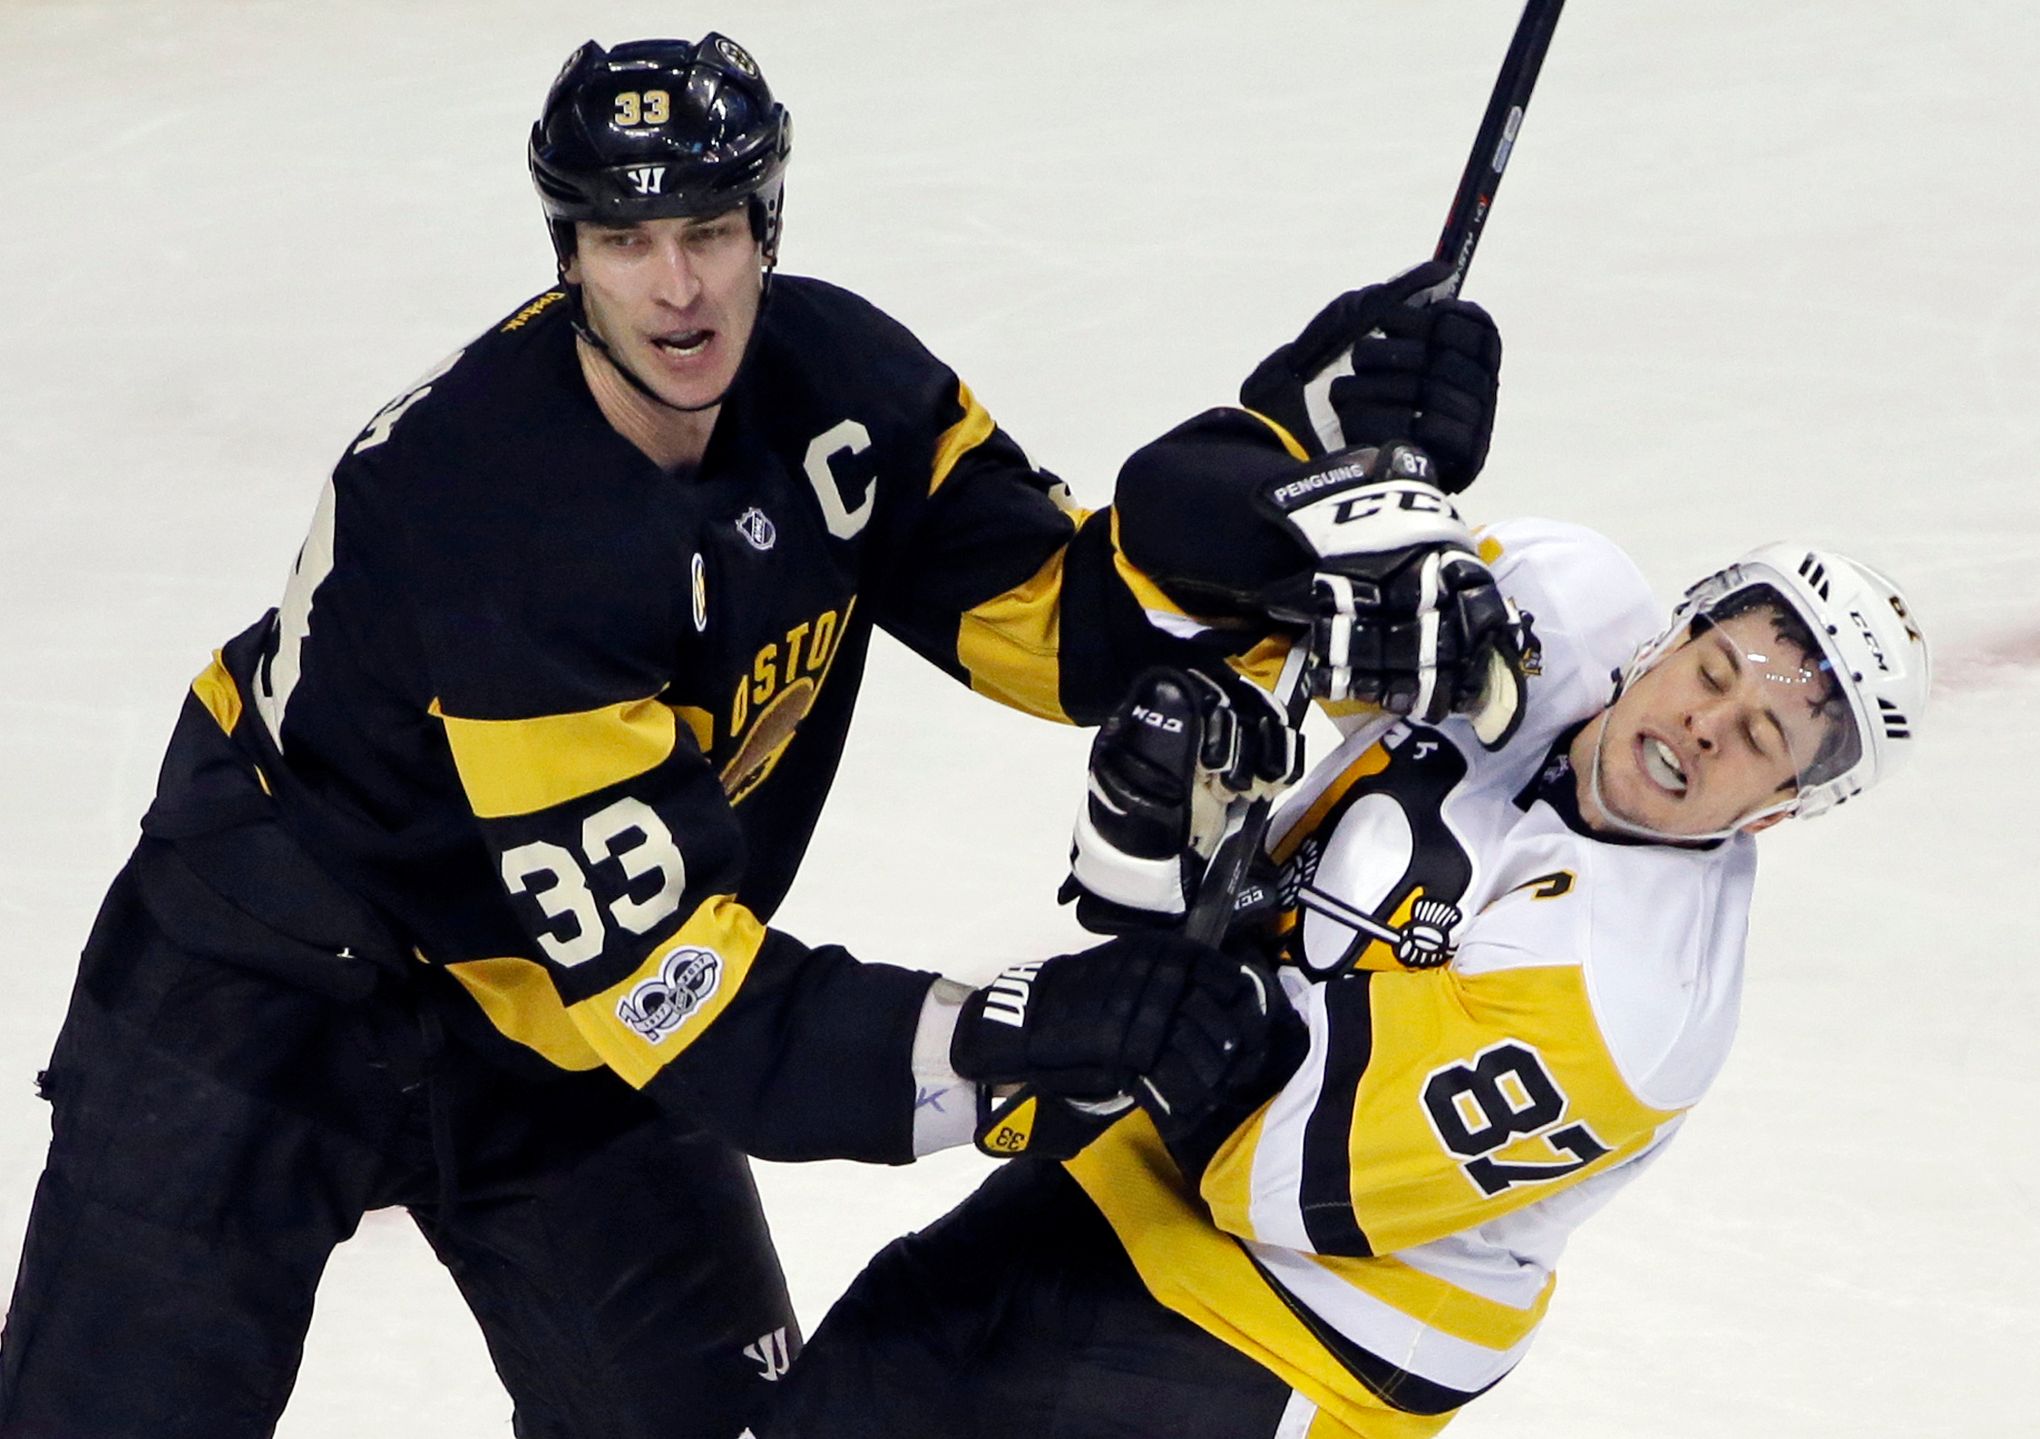 Is Zdeno Chara Done With The Capitals?